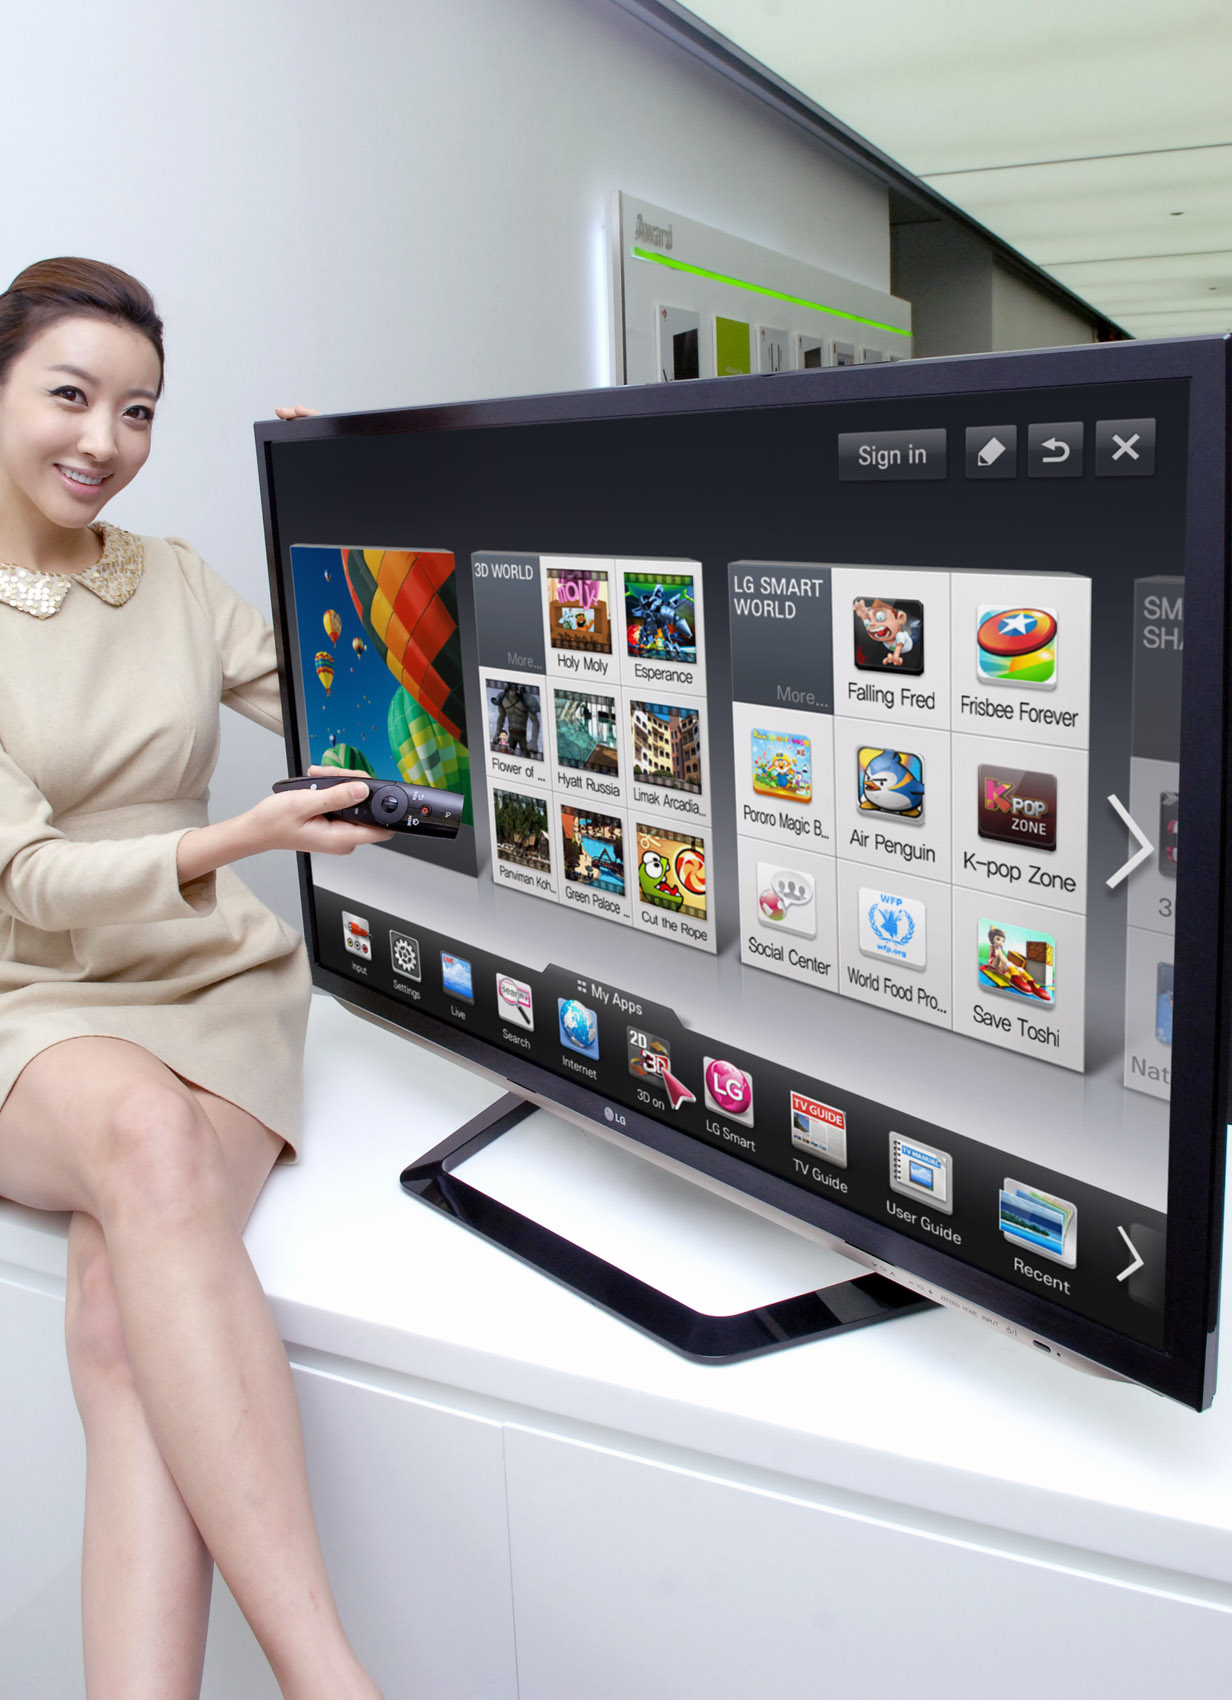 A model is demonstrating the newest Smart TV features with a 2012 LG CINEMA 3D Smart TV